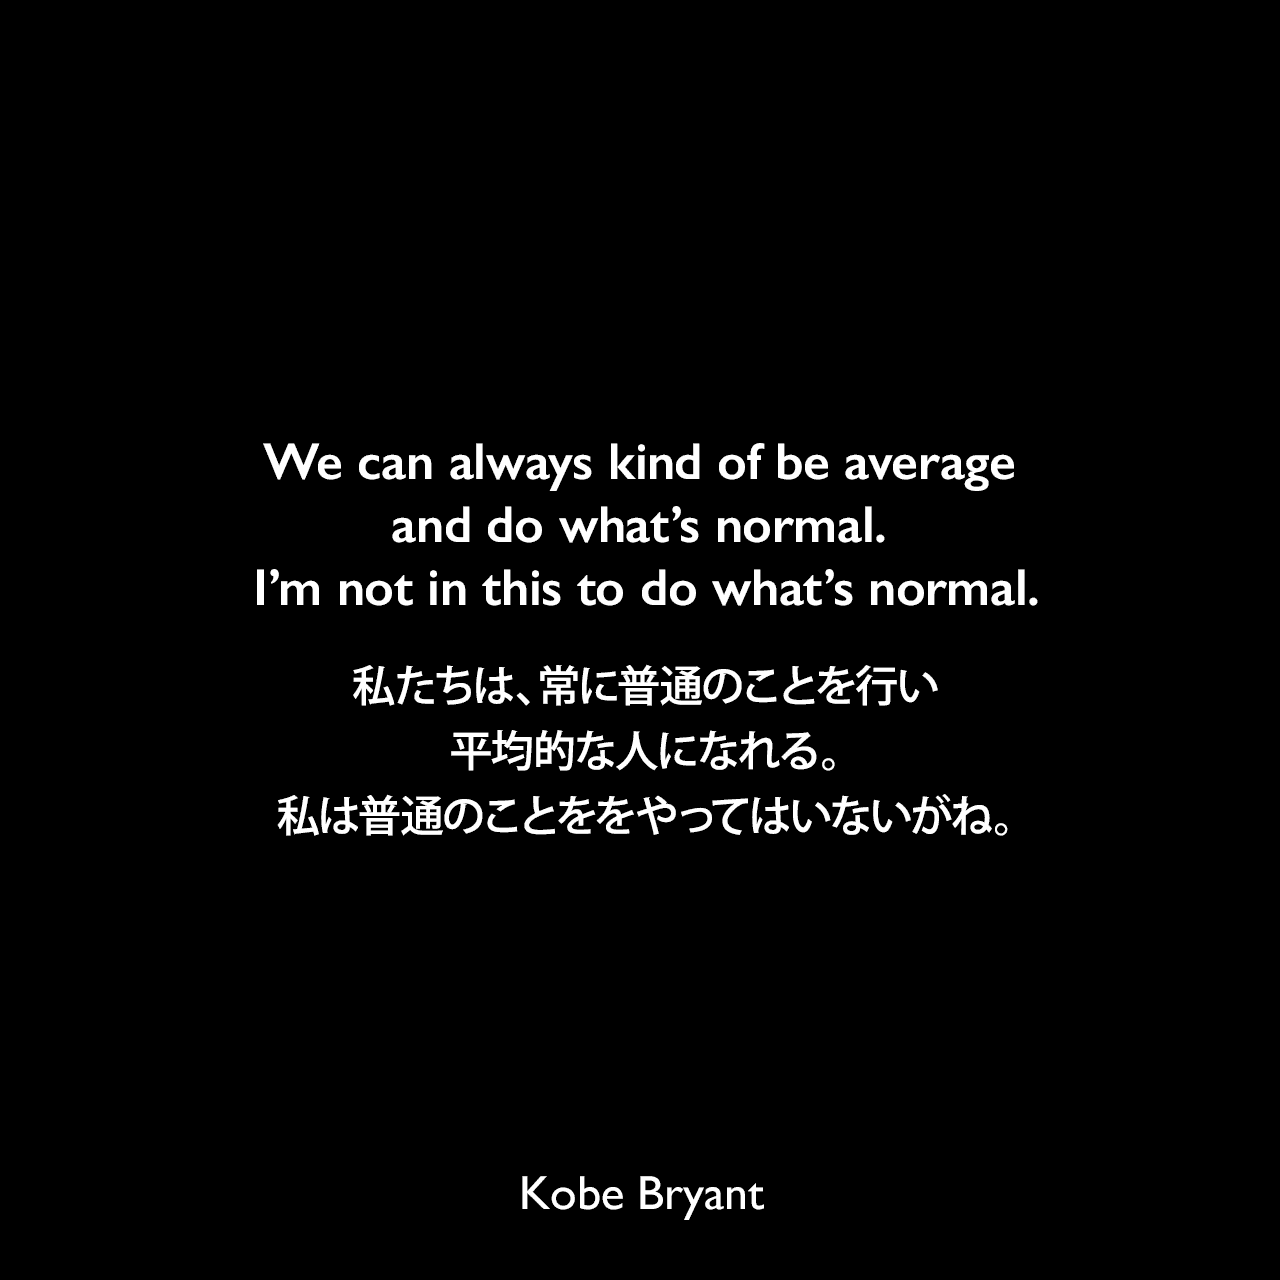 We can always kind of be average and do what’s normal. I’m not in this to do what’s normal.私たちは、常に普通のことを行い平均的な人になれる。私は普通のことををやってはいないがね。Kobe Bryant